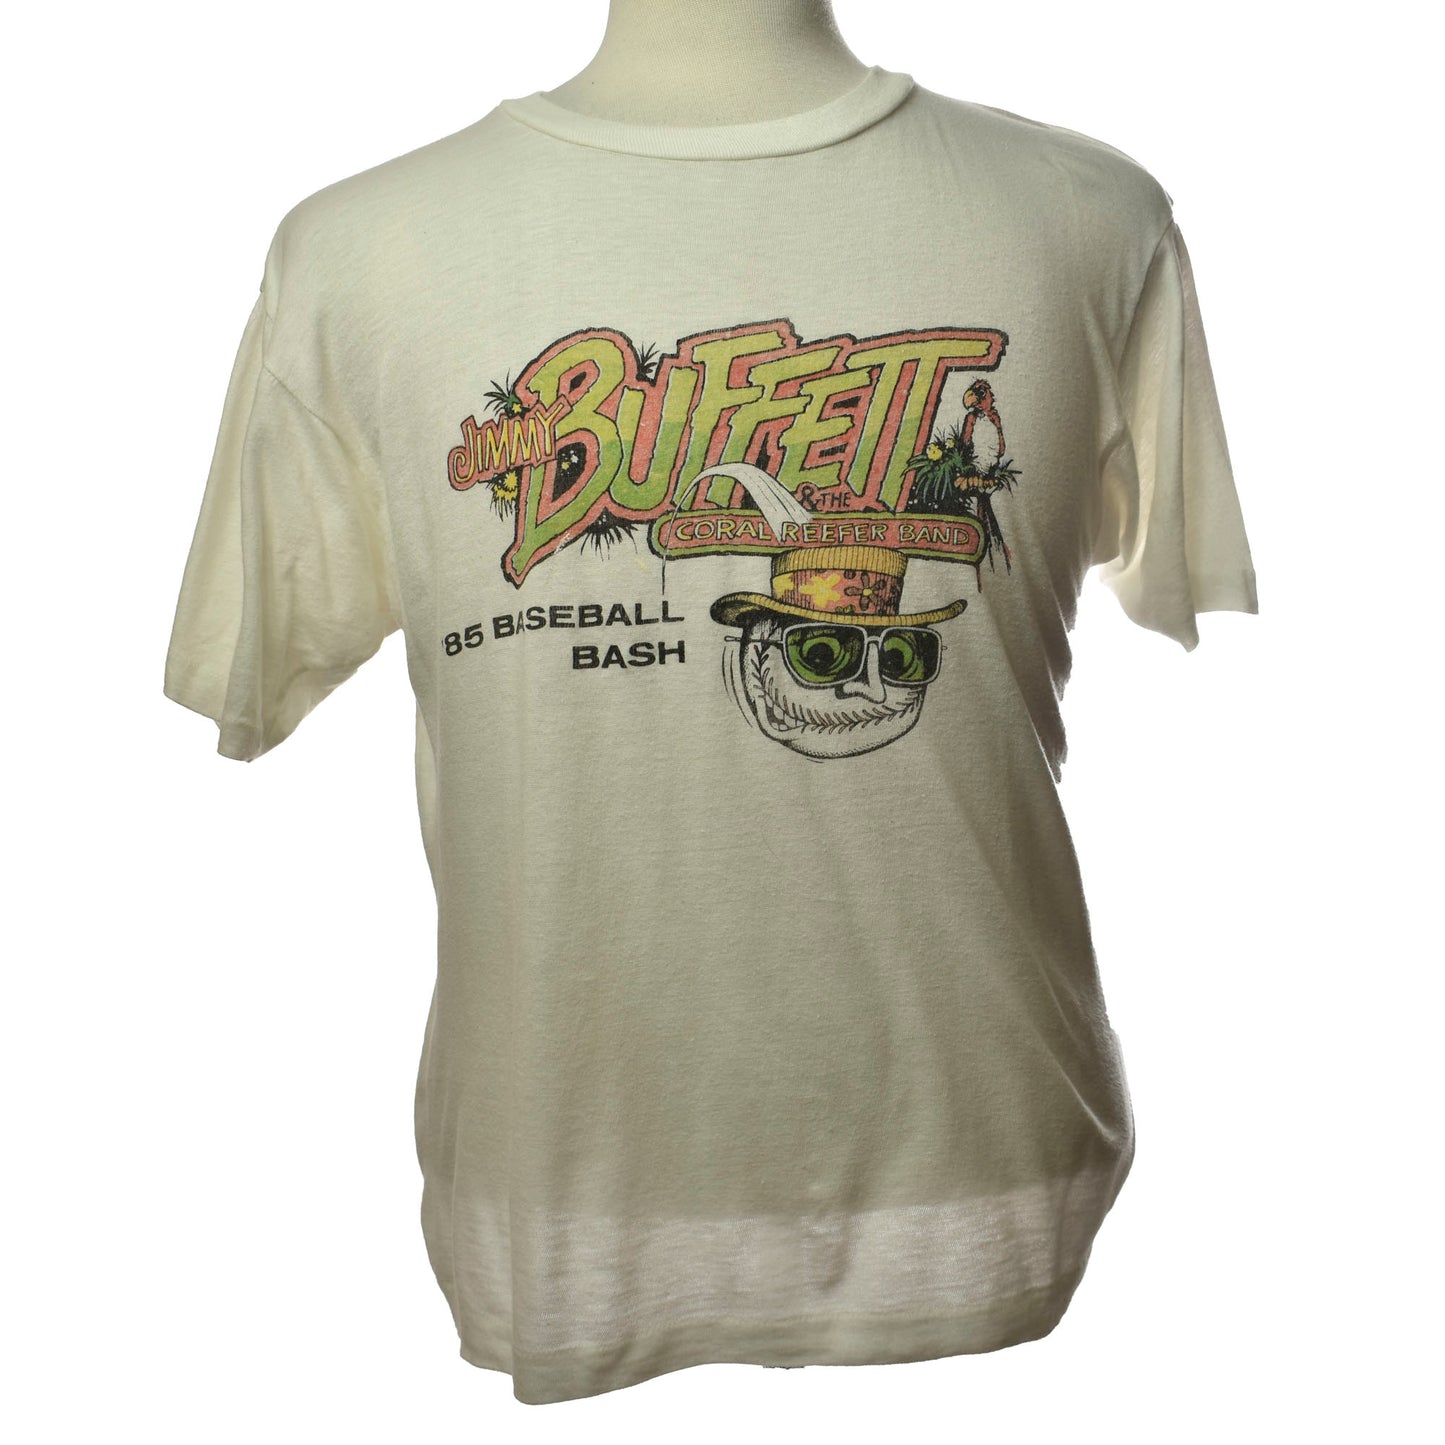 Vintage 1985 Jimmy Buffett & The Coral Reefer Band Concert Sports Tour Single Stitch T-shirt